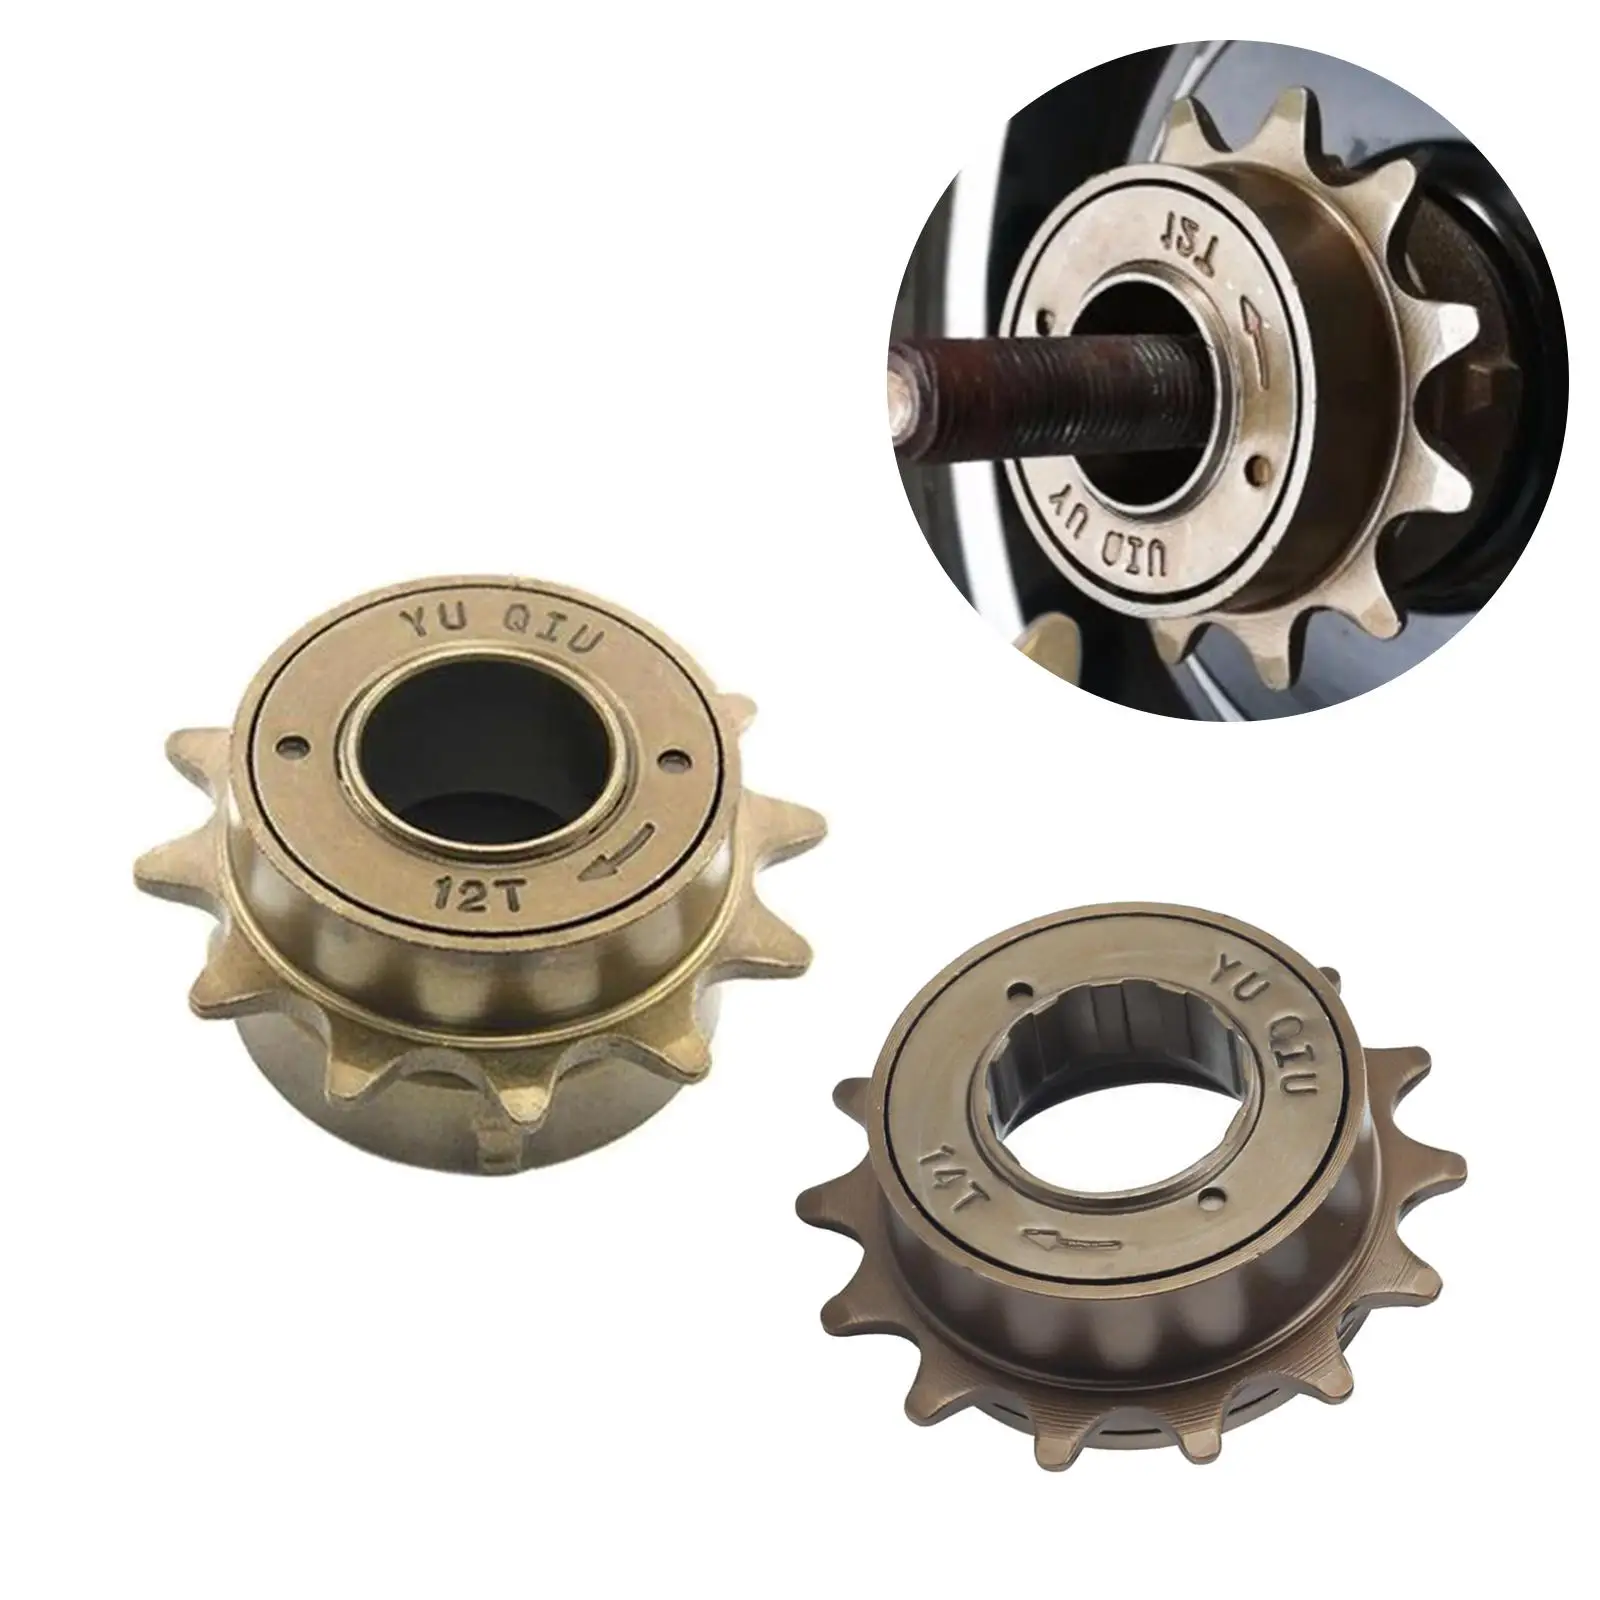 Bike Freewheel Parts Made of High Strength Steel Wear Resistant Easily Install Labor Saving Folding Bikes Bicycle Professional